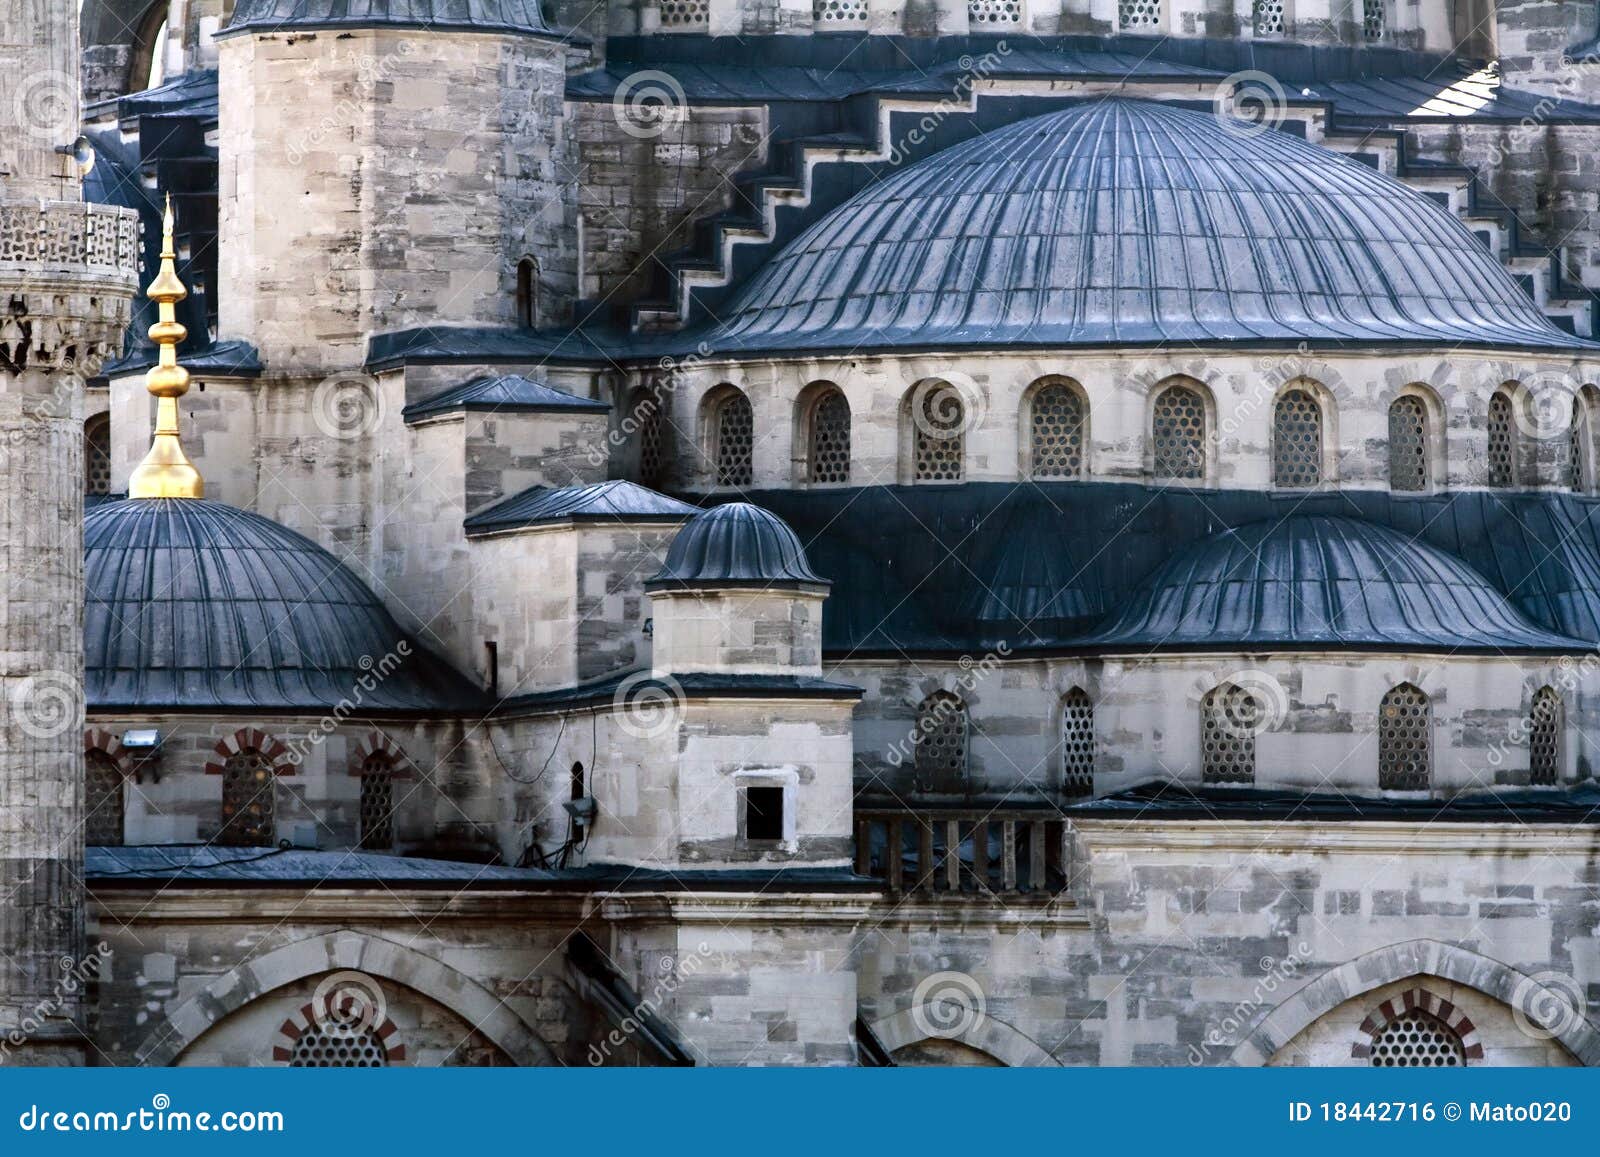 detail of the blue mosque, istanbul, turkey